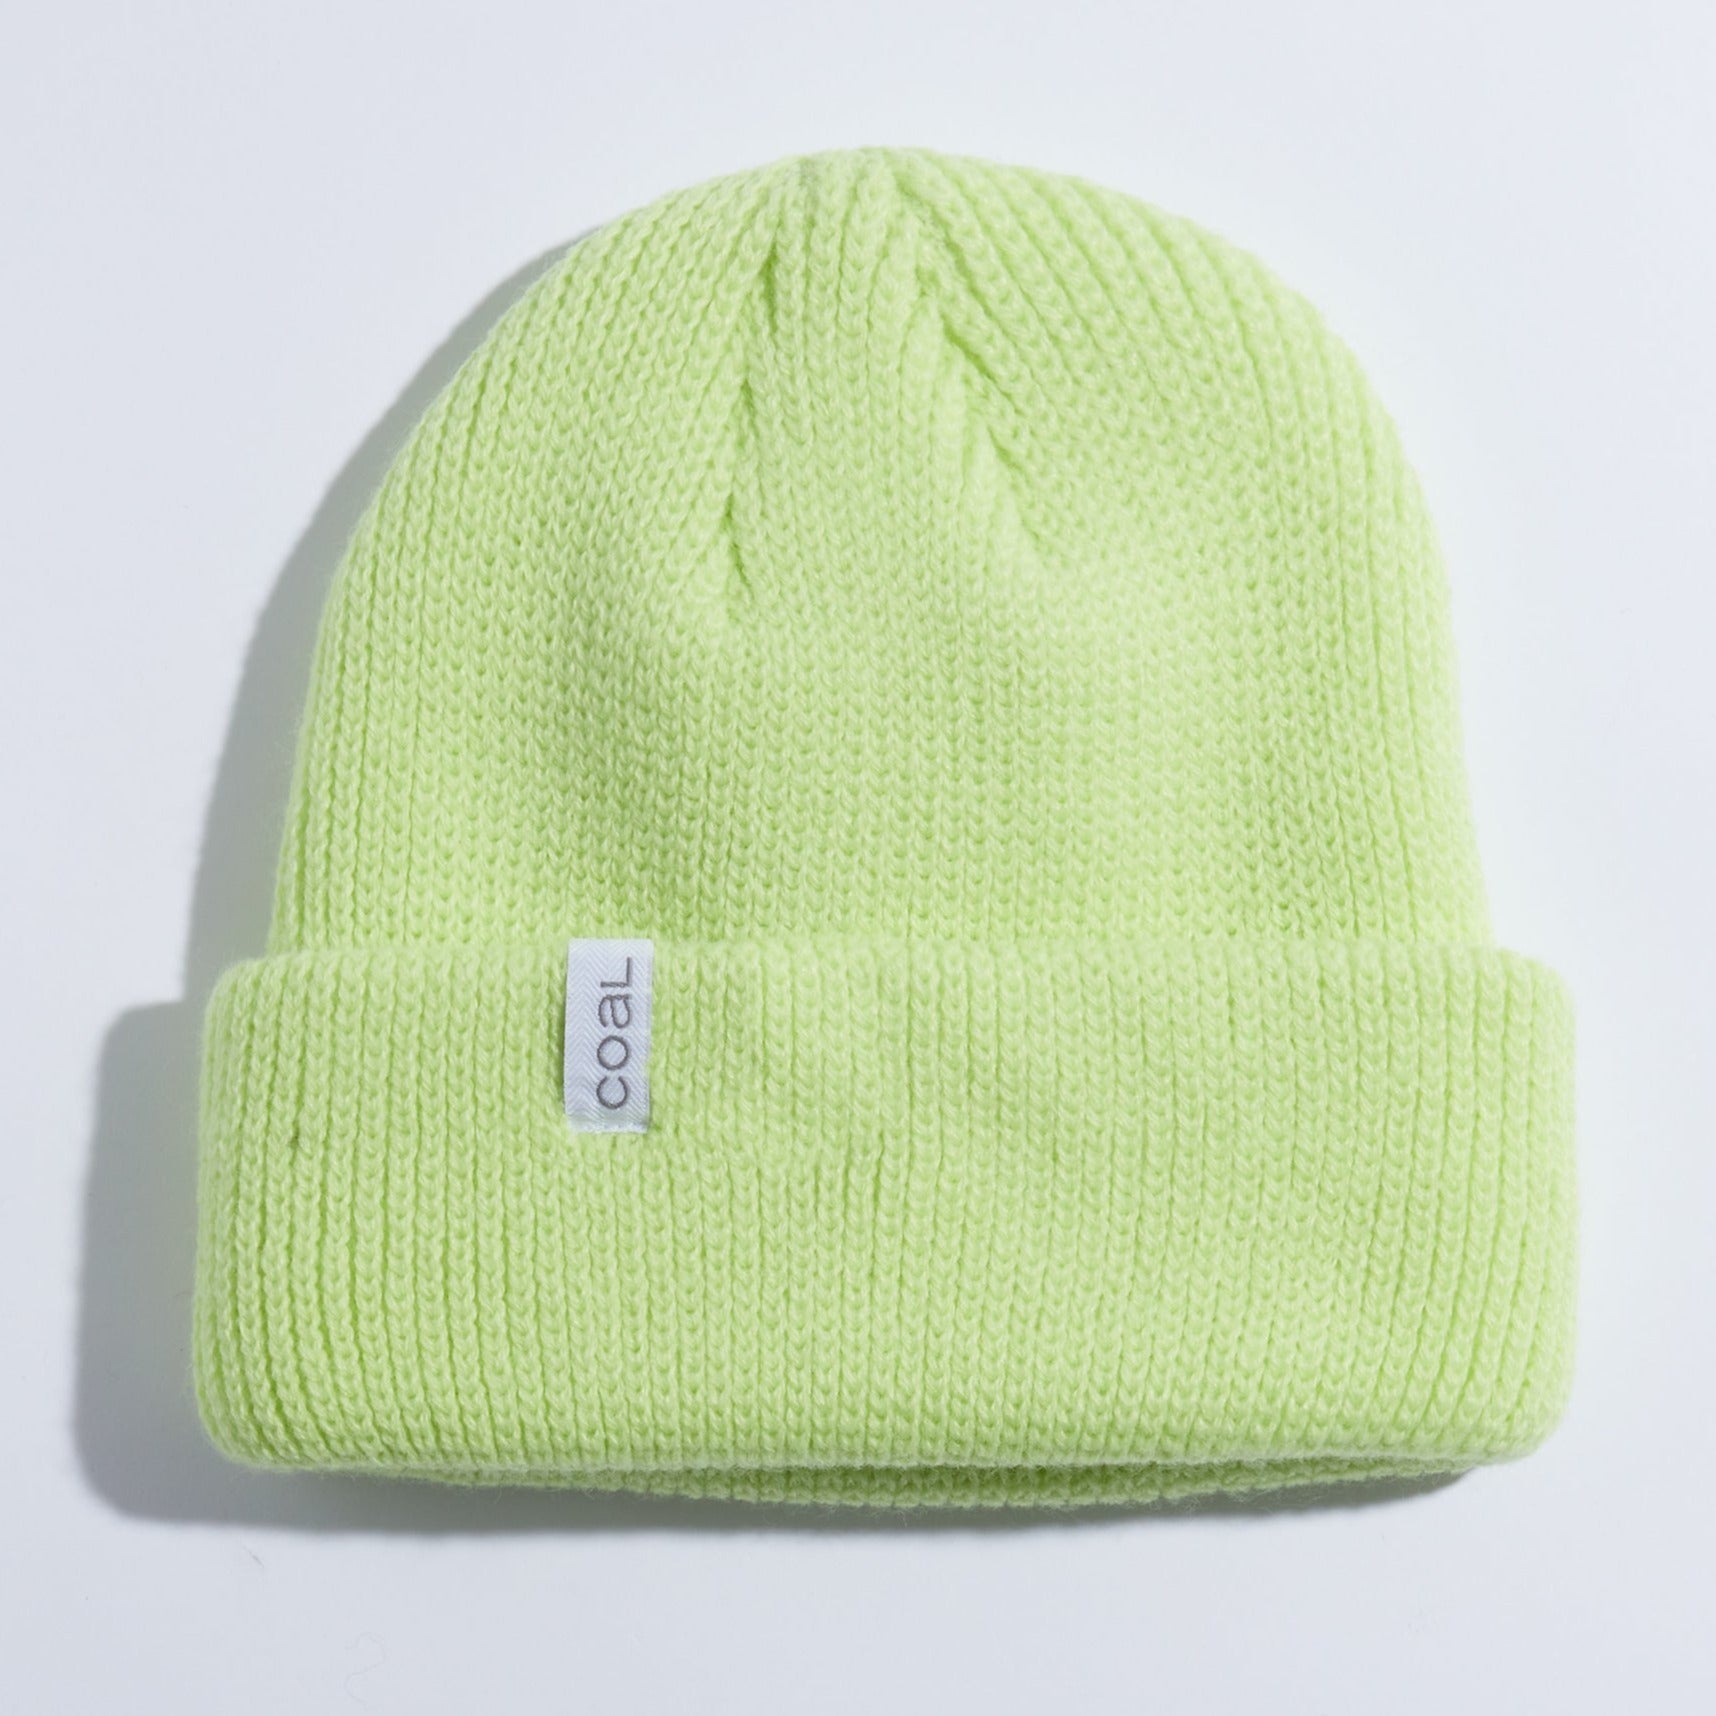 Bonnet Beanie Frena Solid 2 in 1 by Coal - 10,00 €